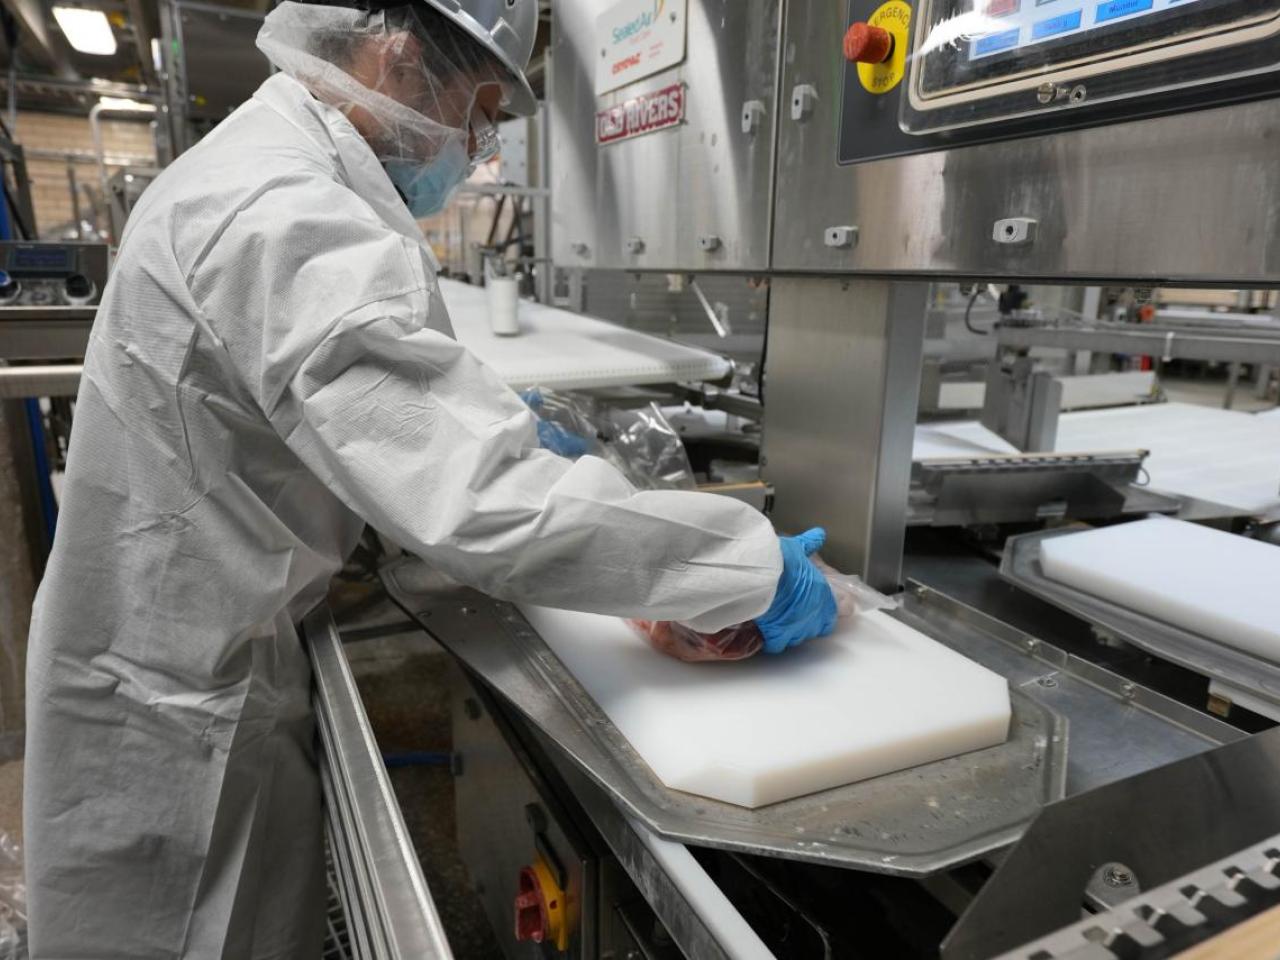 Food processing employee in white lab coat and blue gloves handles meat for packaging on a steel piece of equipment made for food packaging